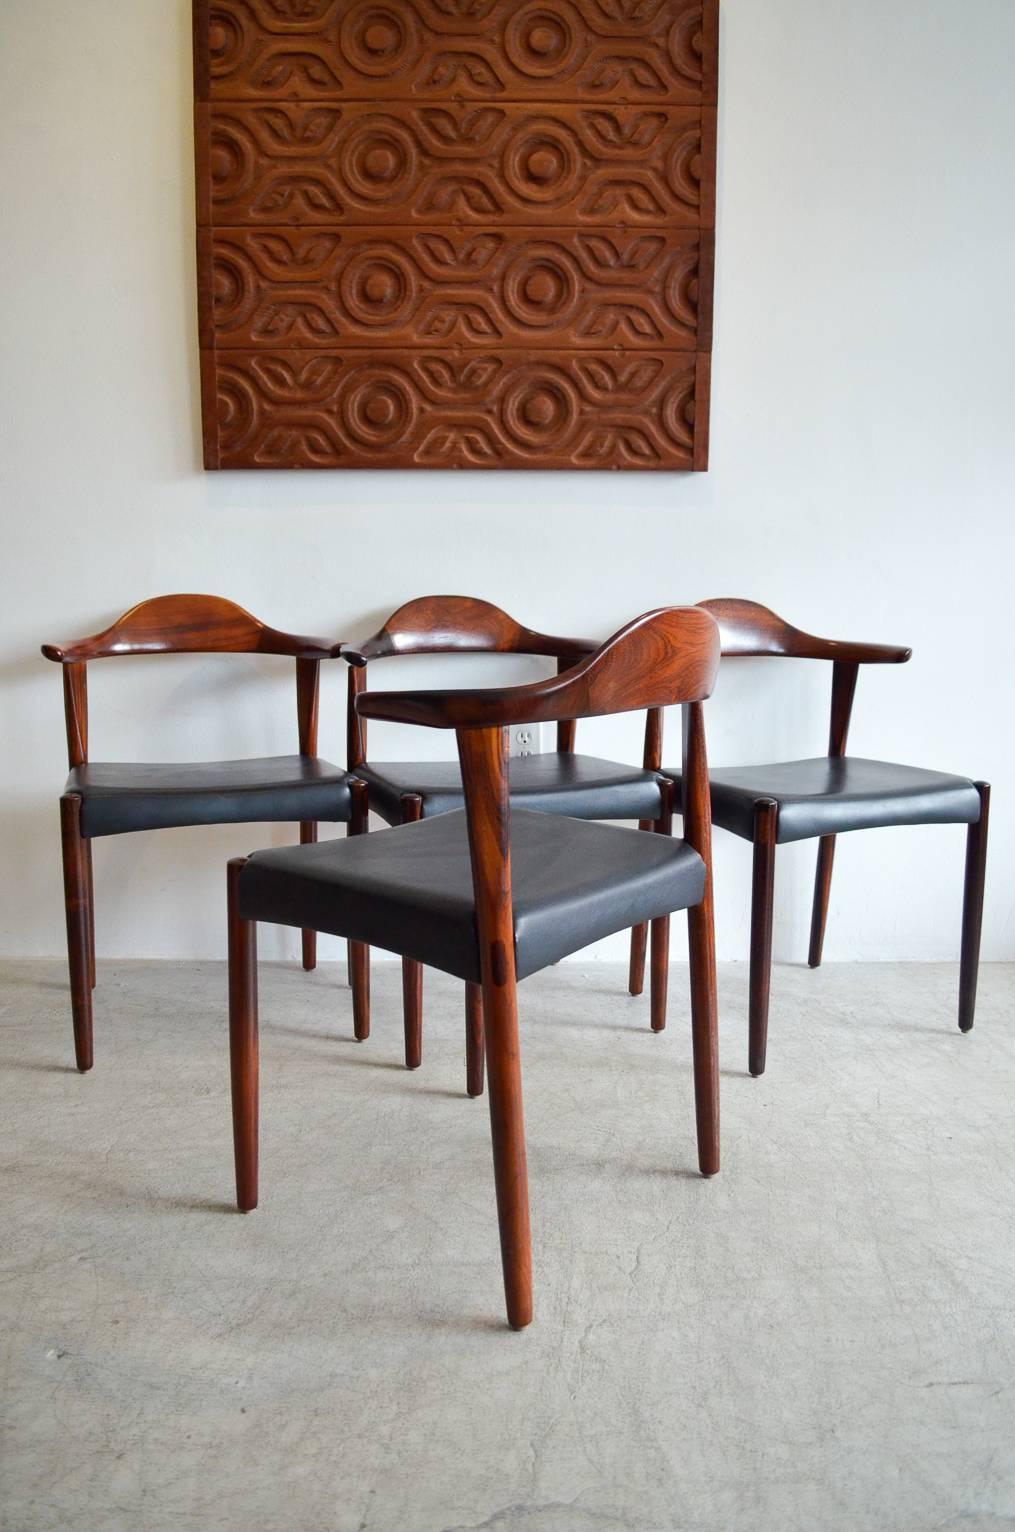 An exceptionally crafted Danish rosewood dining set by Harry Ostergaard for Randers Mobelfabrik. Hand-sculpted chairs resemble Han's Wegner's bull horn chair. These are done with solid rosewood with excellent leg detail and inserts with curved backs